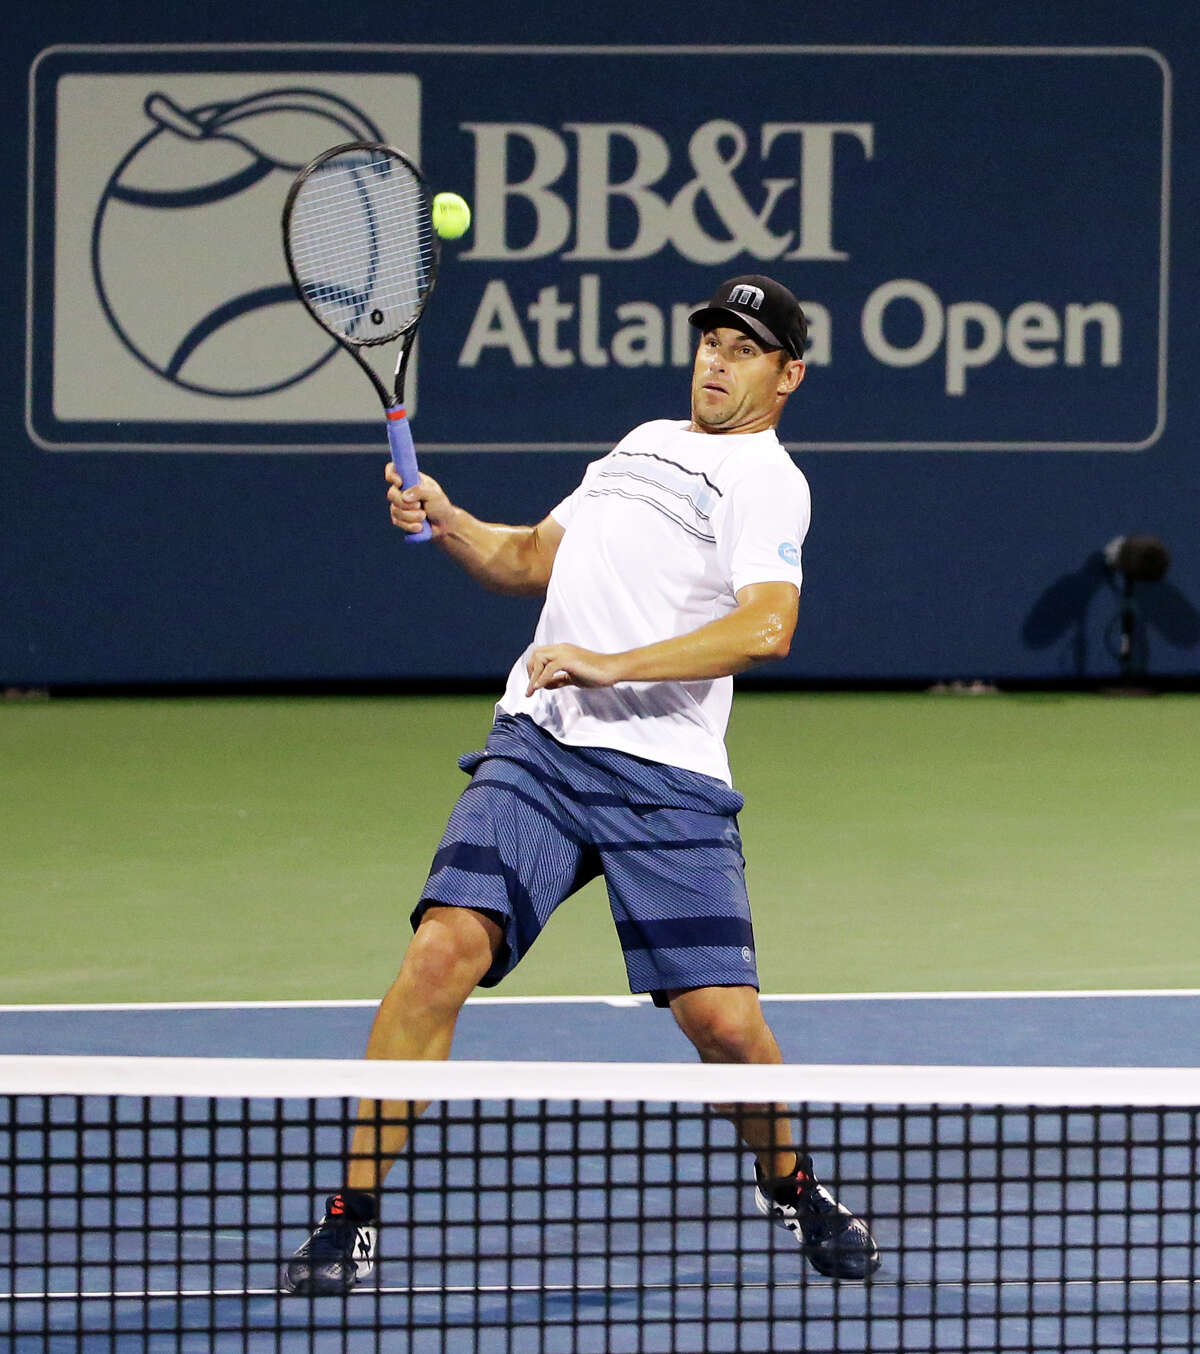 Andy Roddick returns a shot during the first set of a first round doubles match with partner Mardy Fish against Yen-Hsun Lu and Jonathan Marray at the Atlanta Open tennis tournament Wednesday, July 29, 2015, in Atlanta. Roddick and Fish won 7-6, 6-4. (AP Photo/David Goldman)